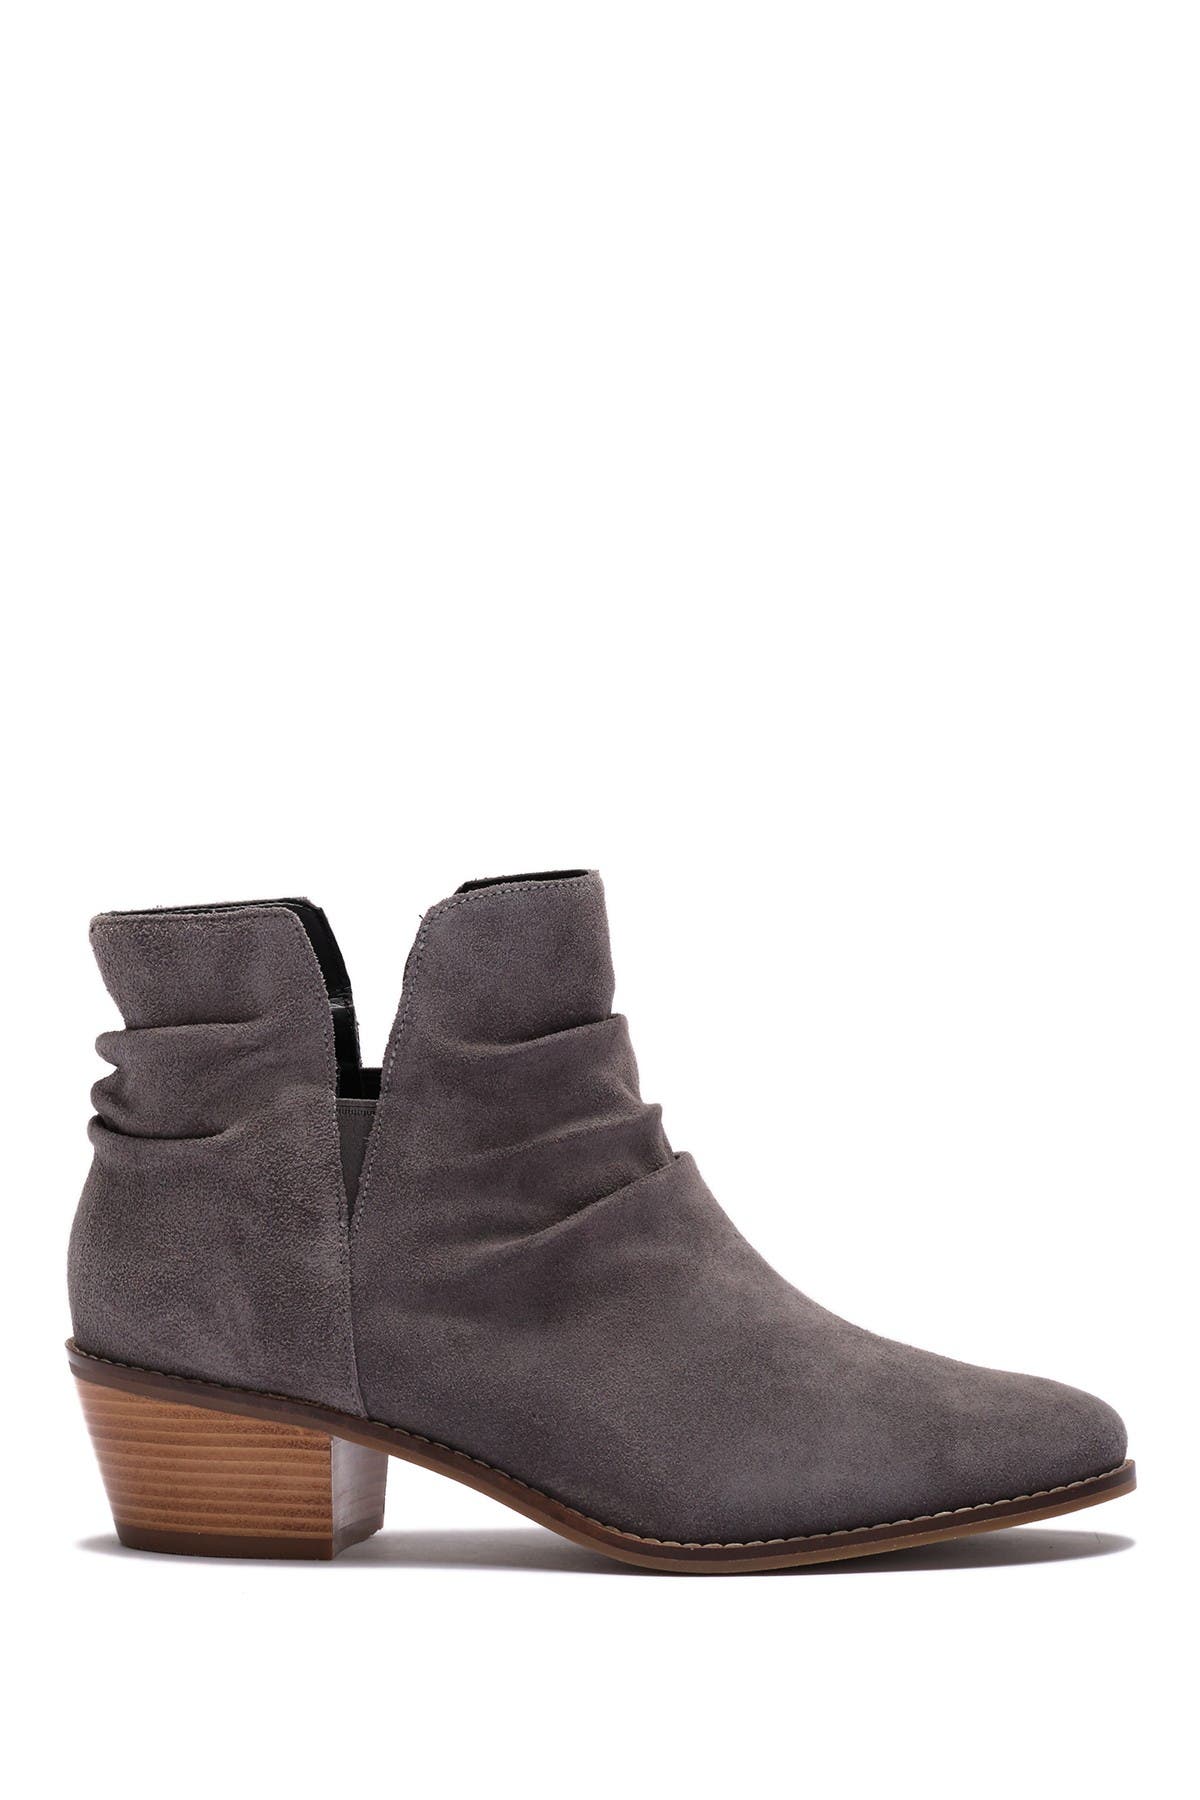 cole haan alayna suede bootie